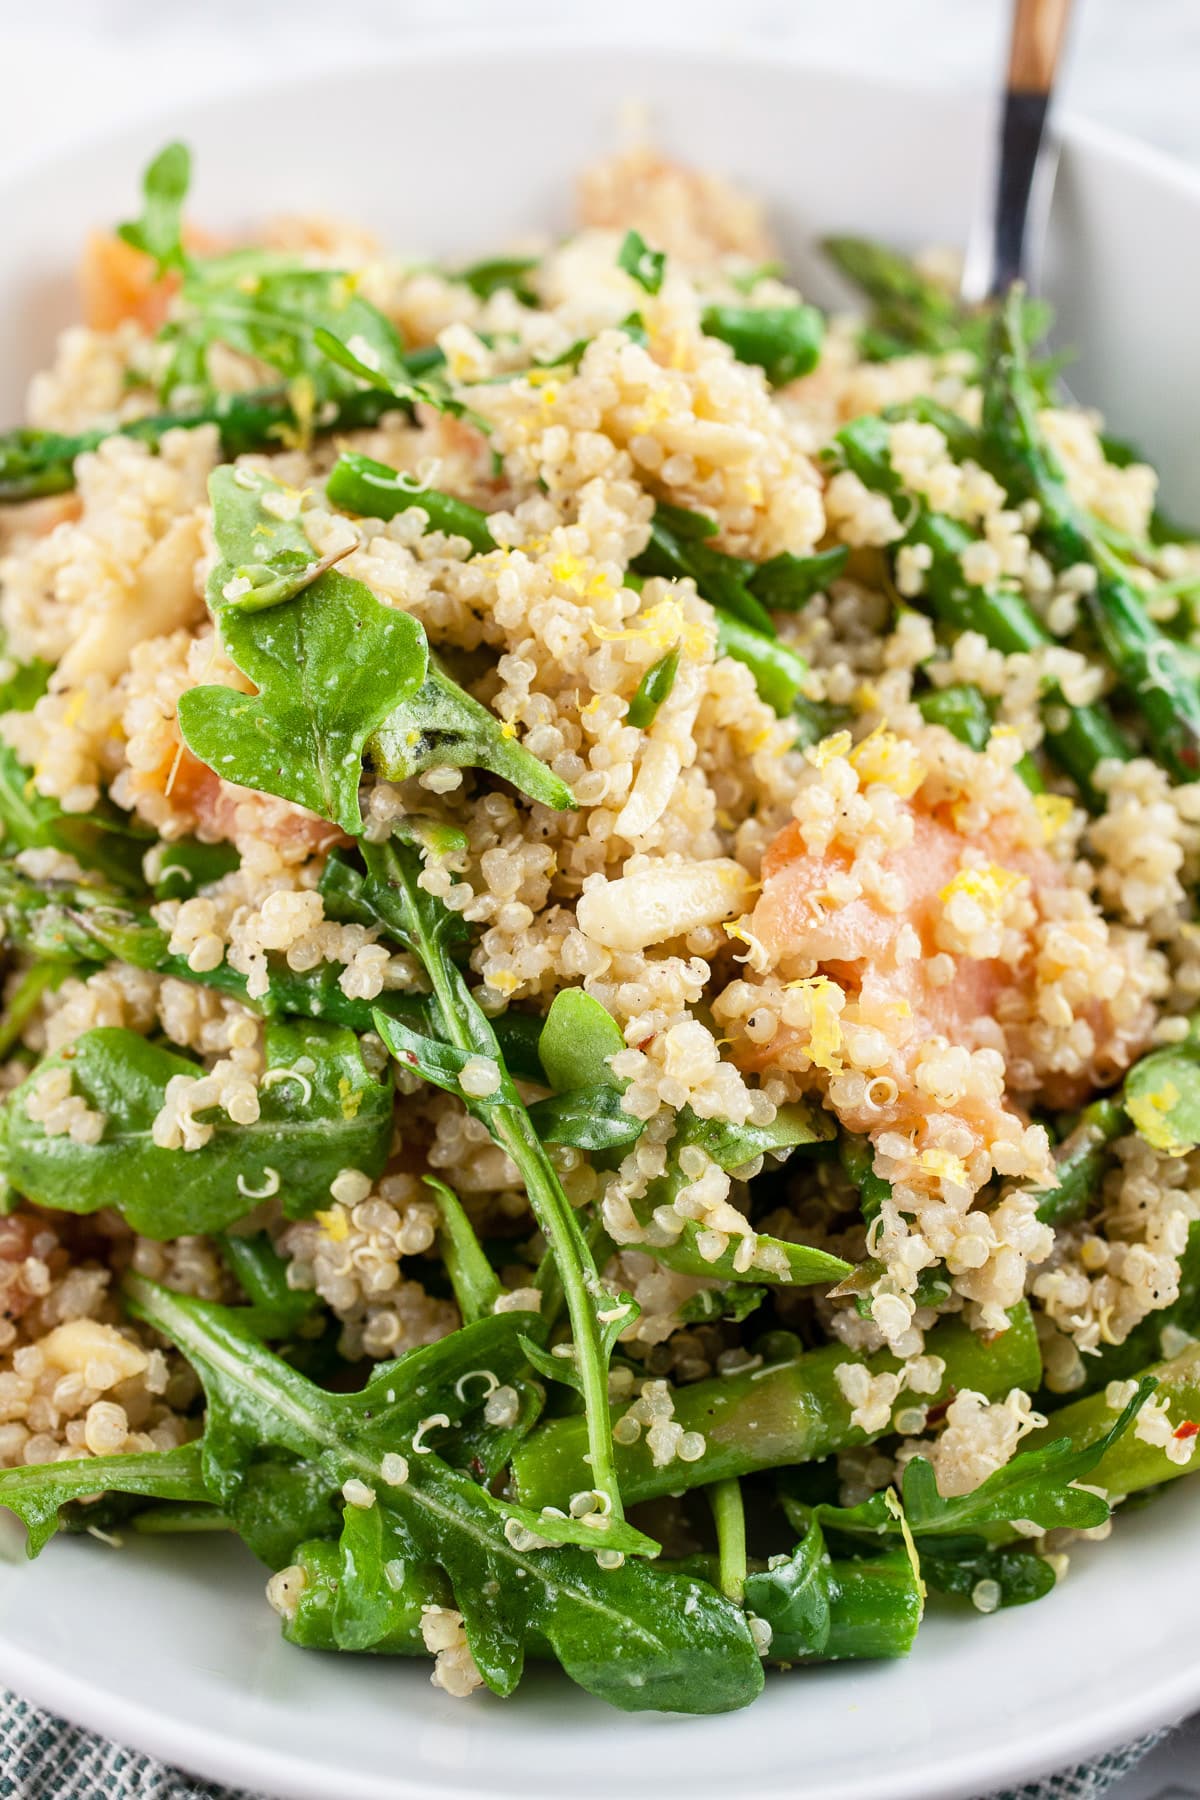 Smoked salmon arugula quinoa salad with asparagus in white bowl with fork.